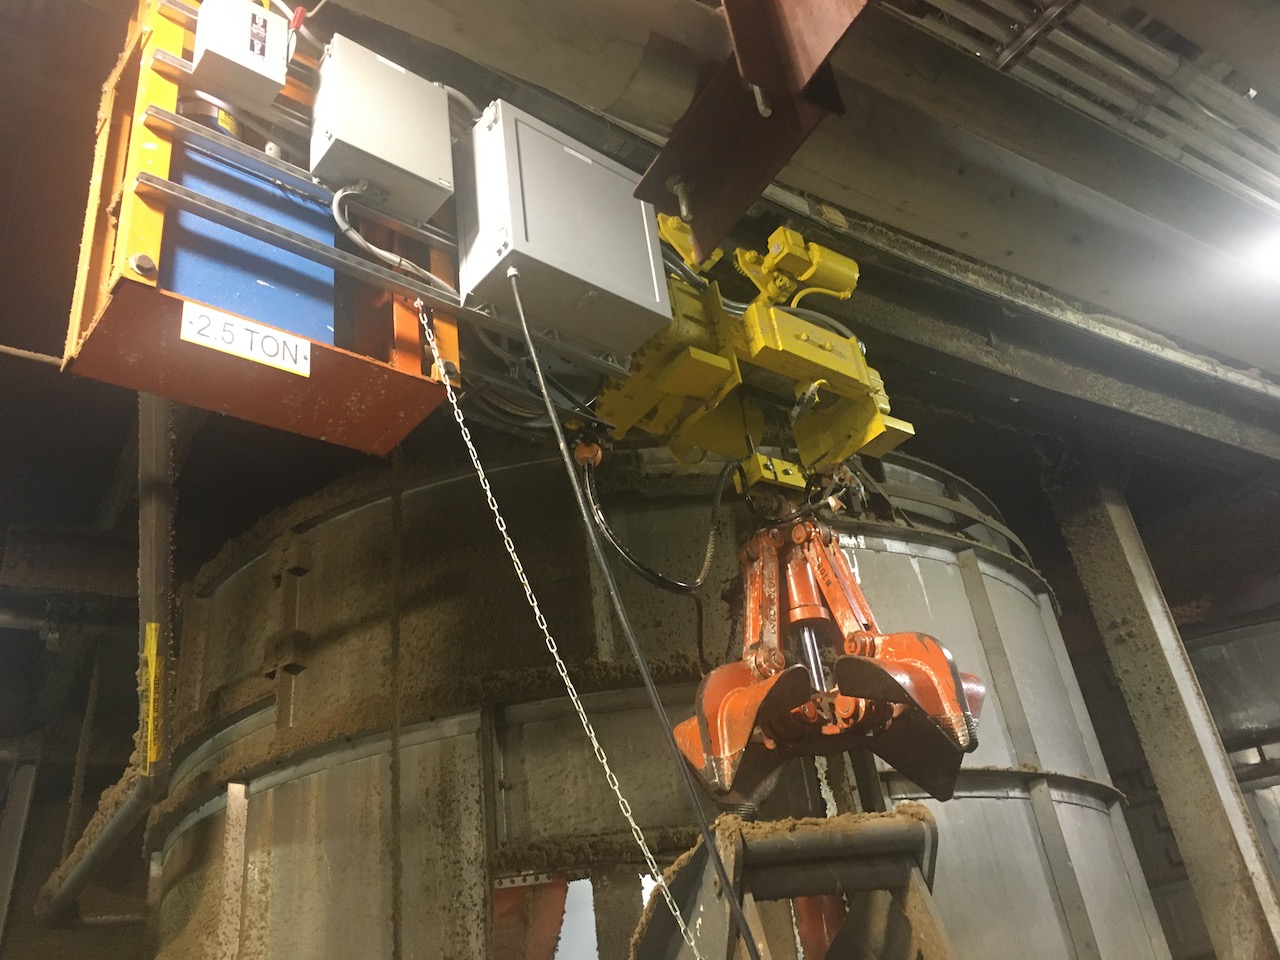 ACCO MHS partners with Hoist & Crane Service Group to Supply and Install Custom Hoist for Pulp and Paper Facility